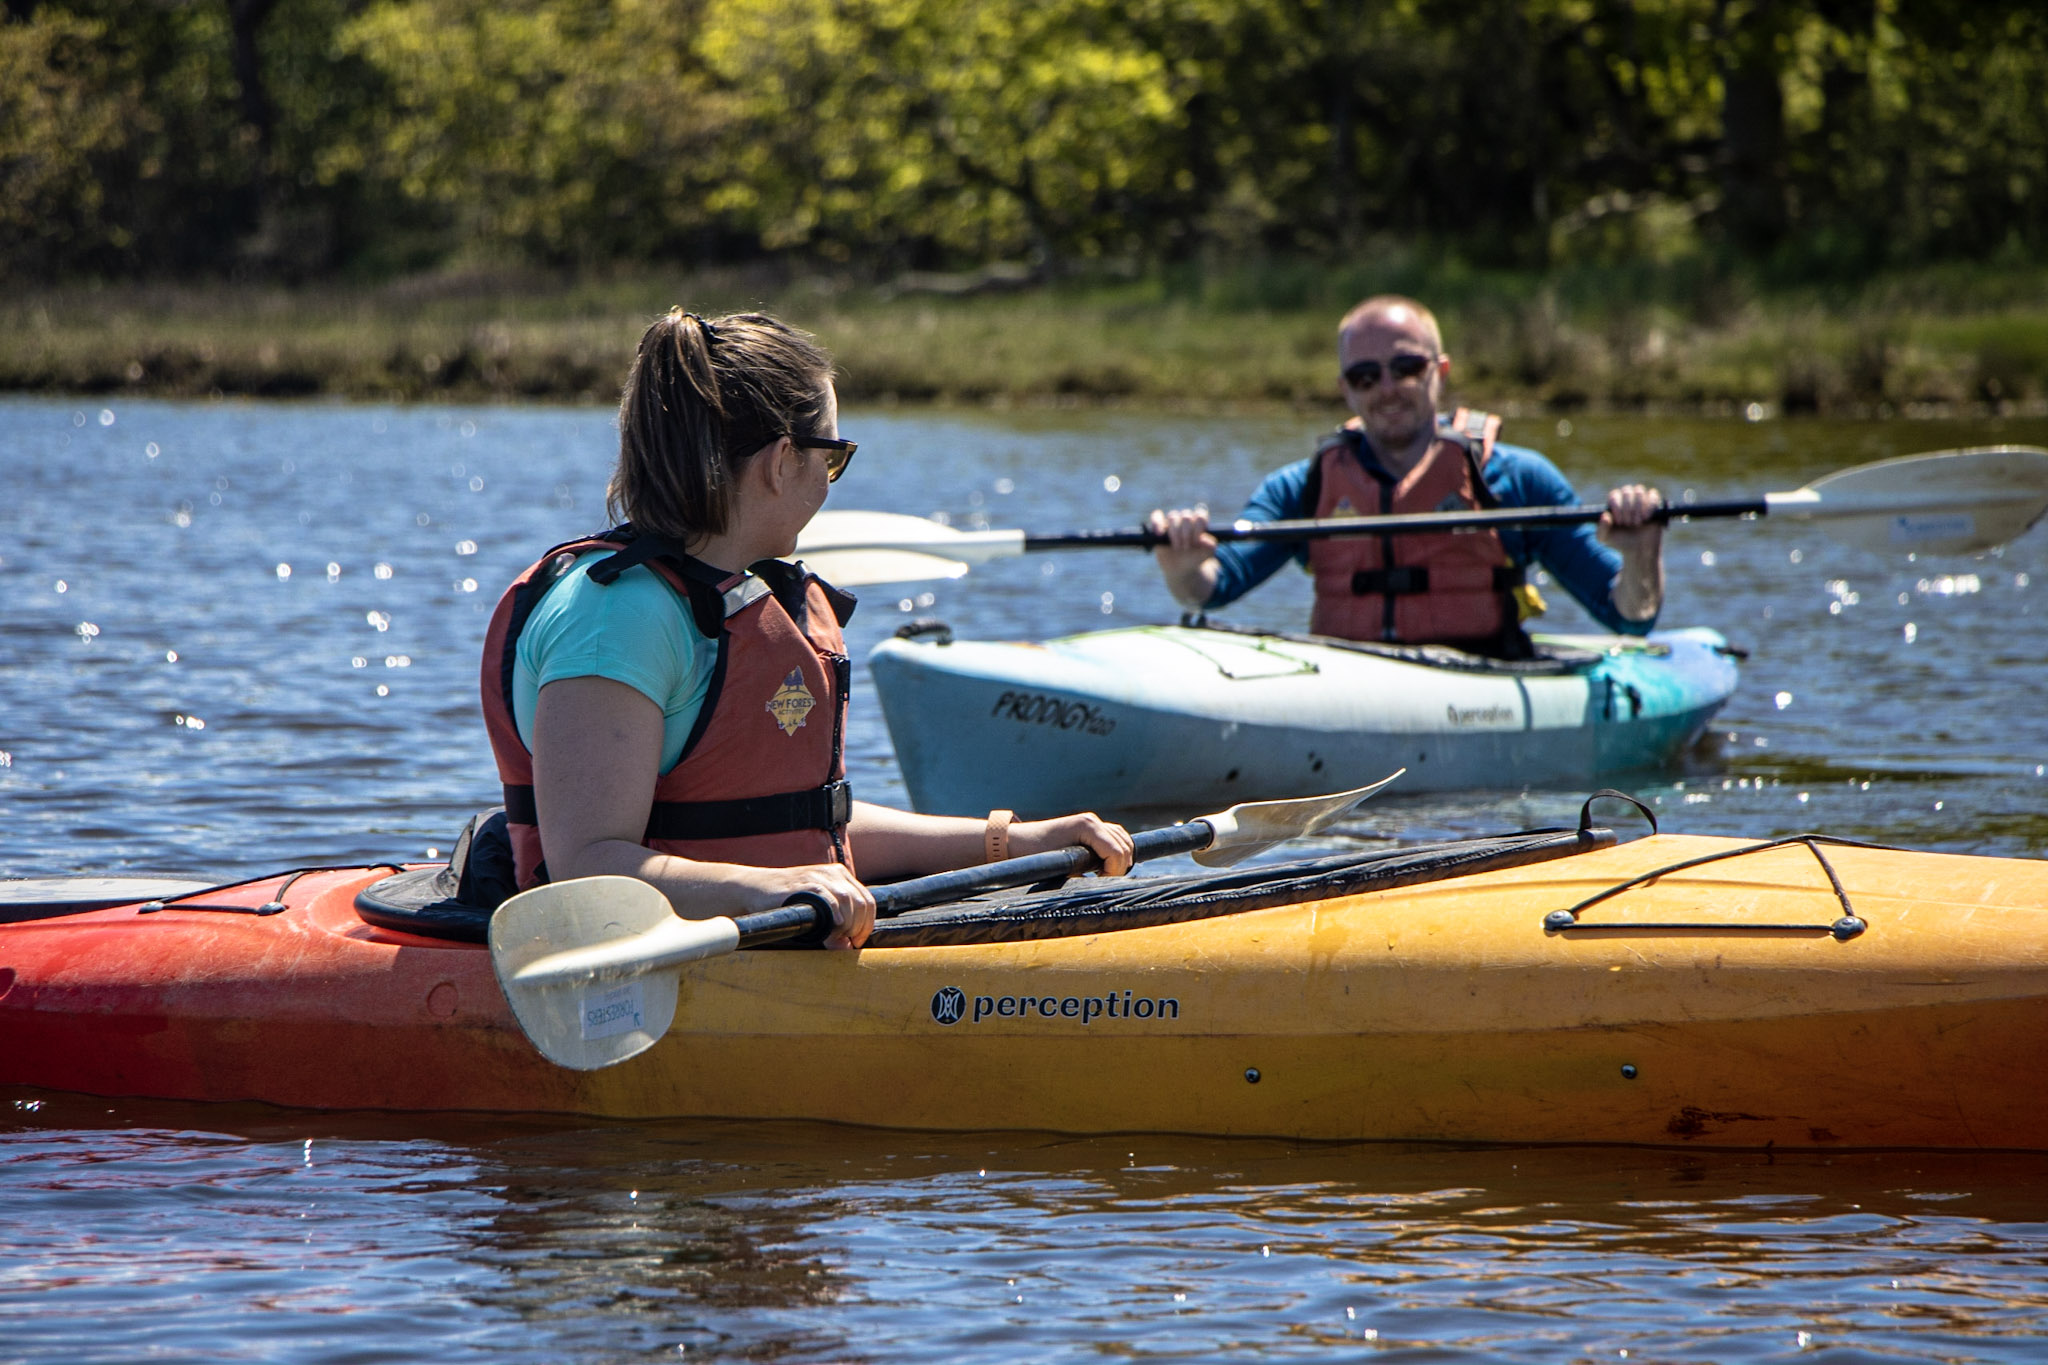 Kayaking is just one of the activities for couples that we offer.